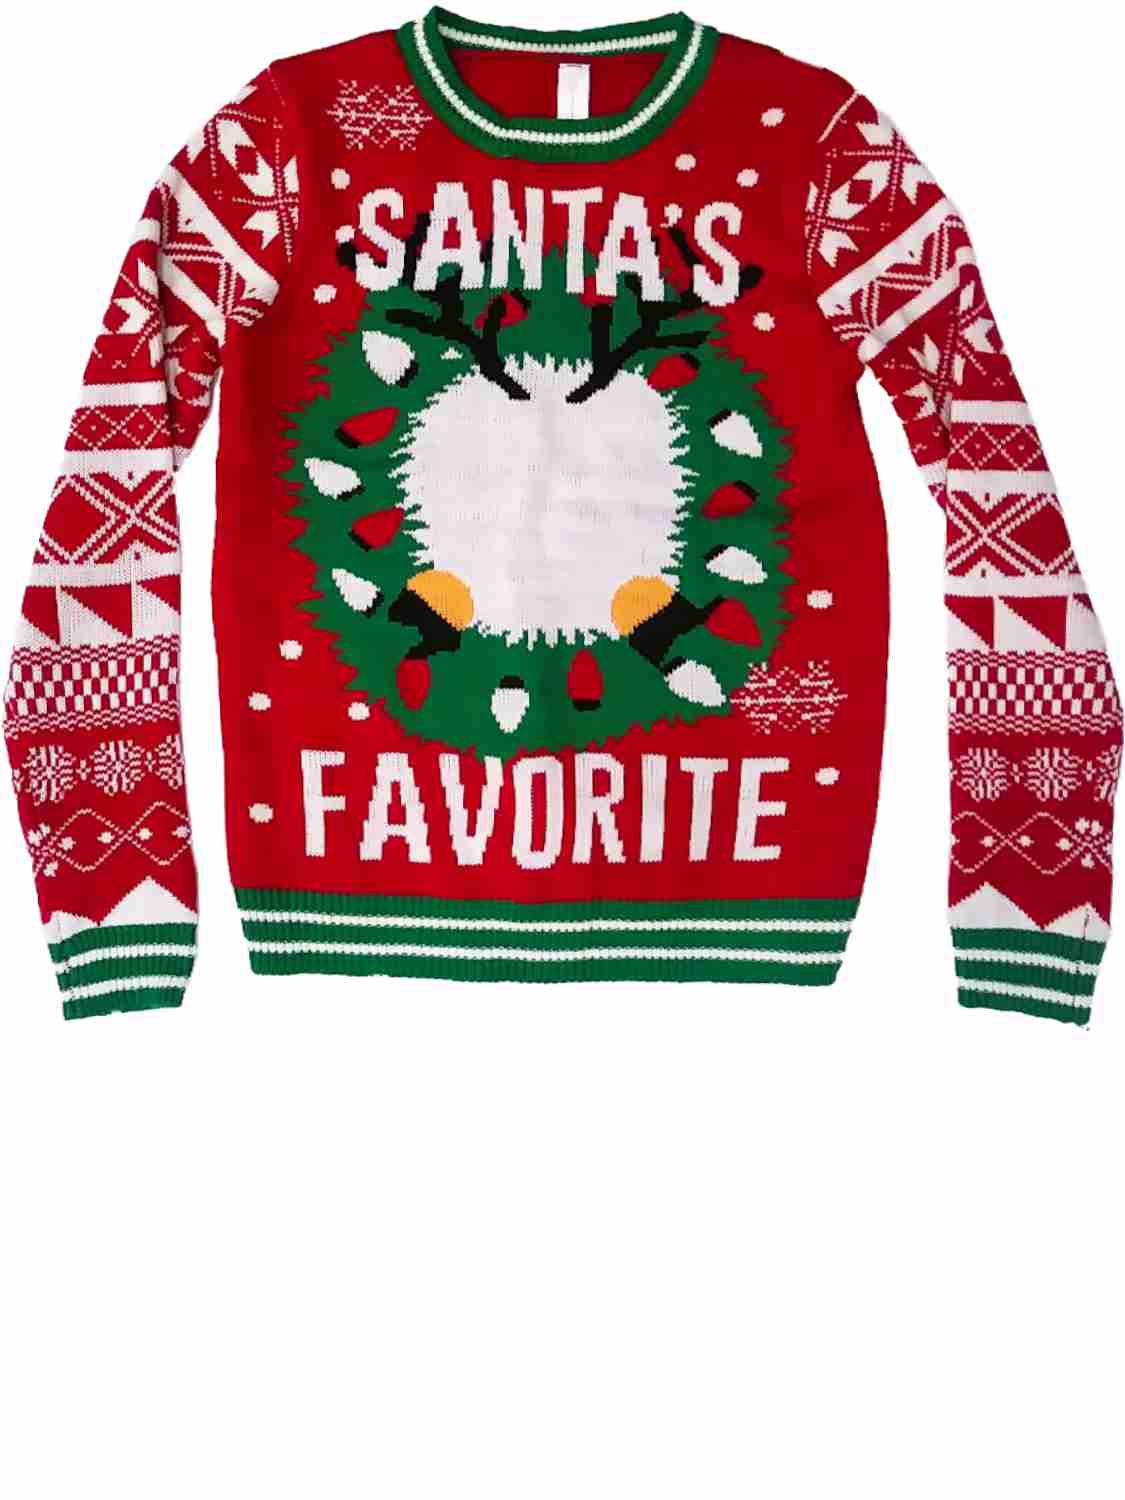 NOBO Womens Santas Favorite Wreath Christmas Pull-Over Holiday Sweater Large